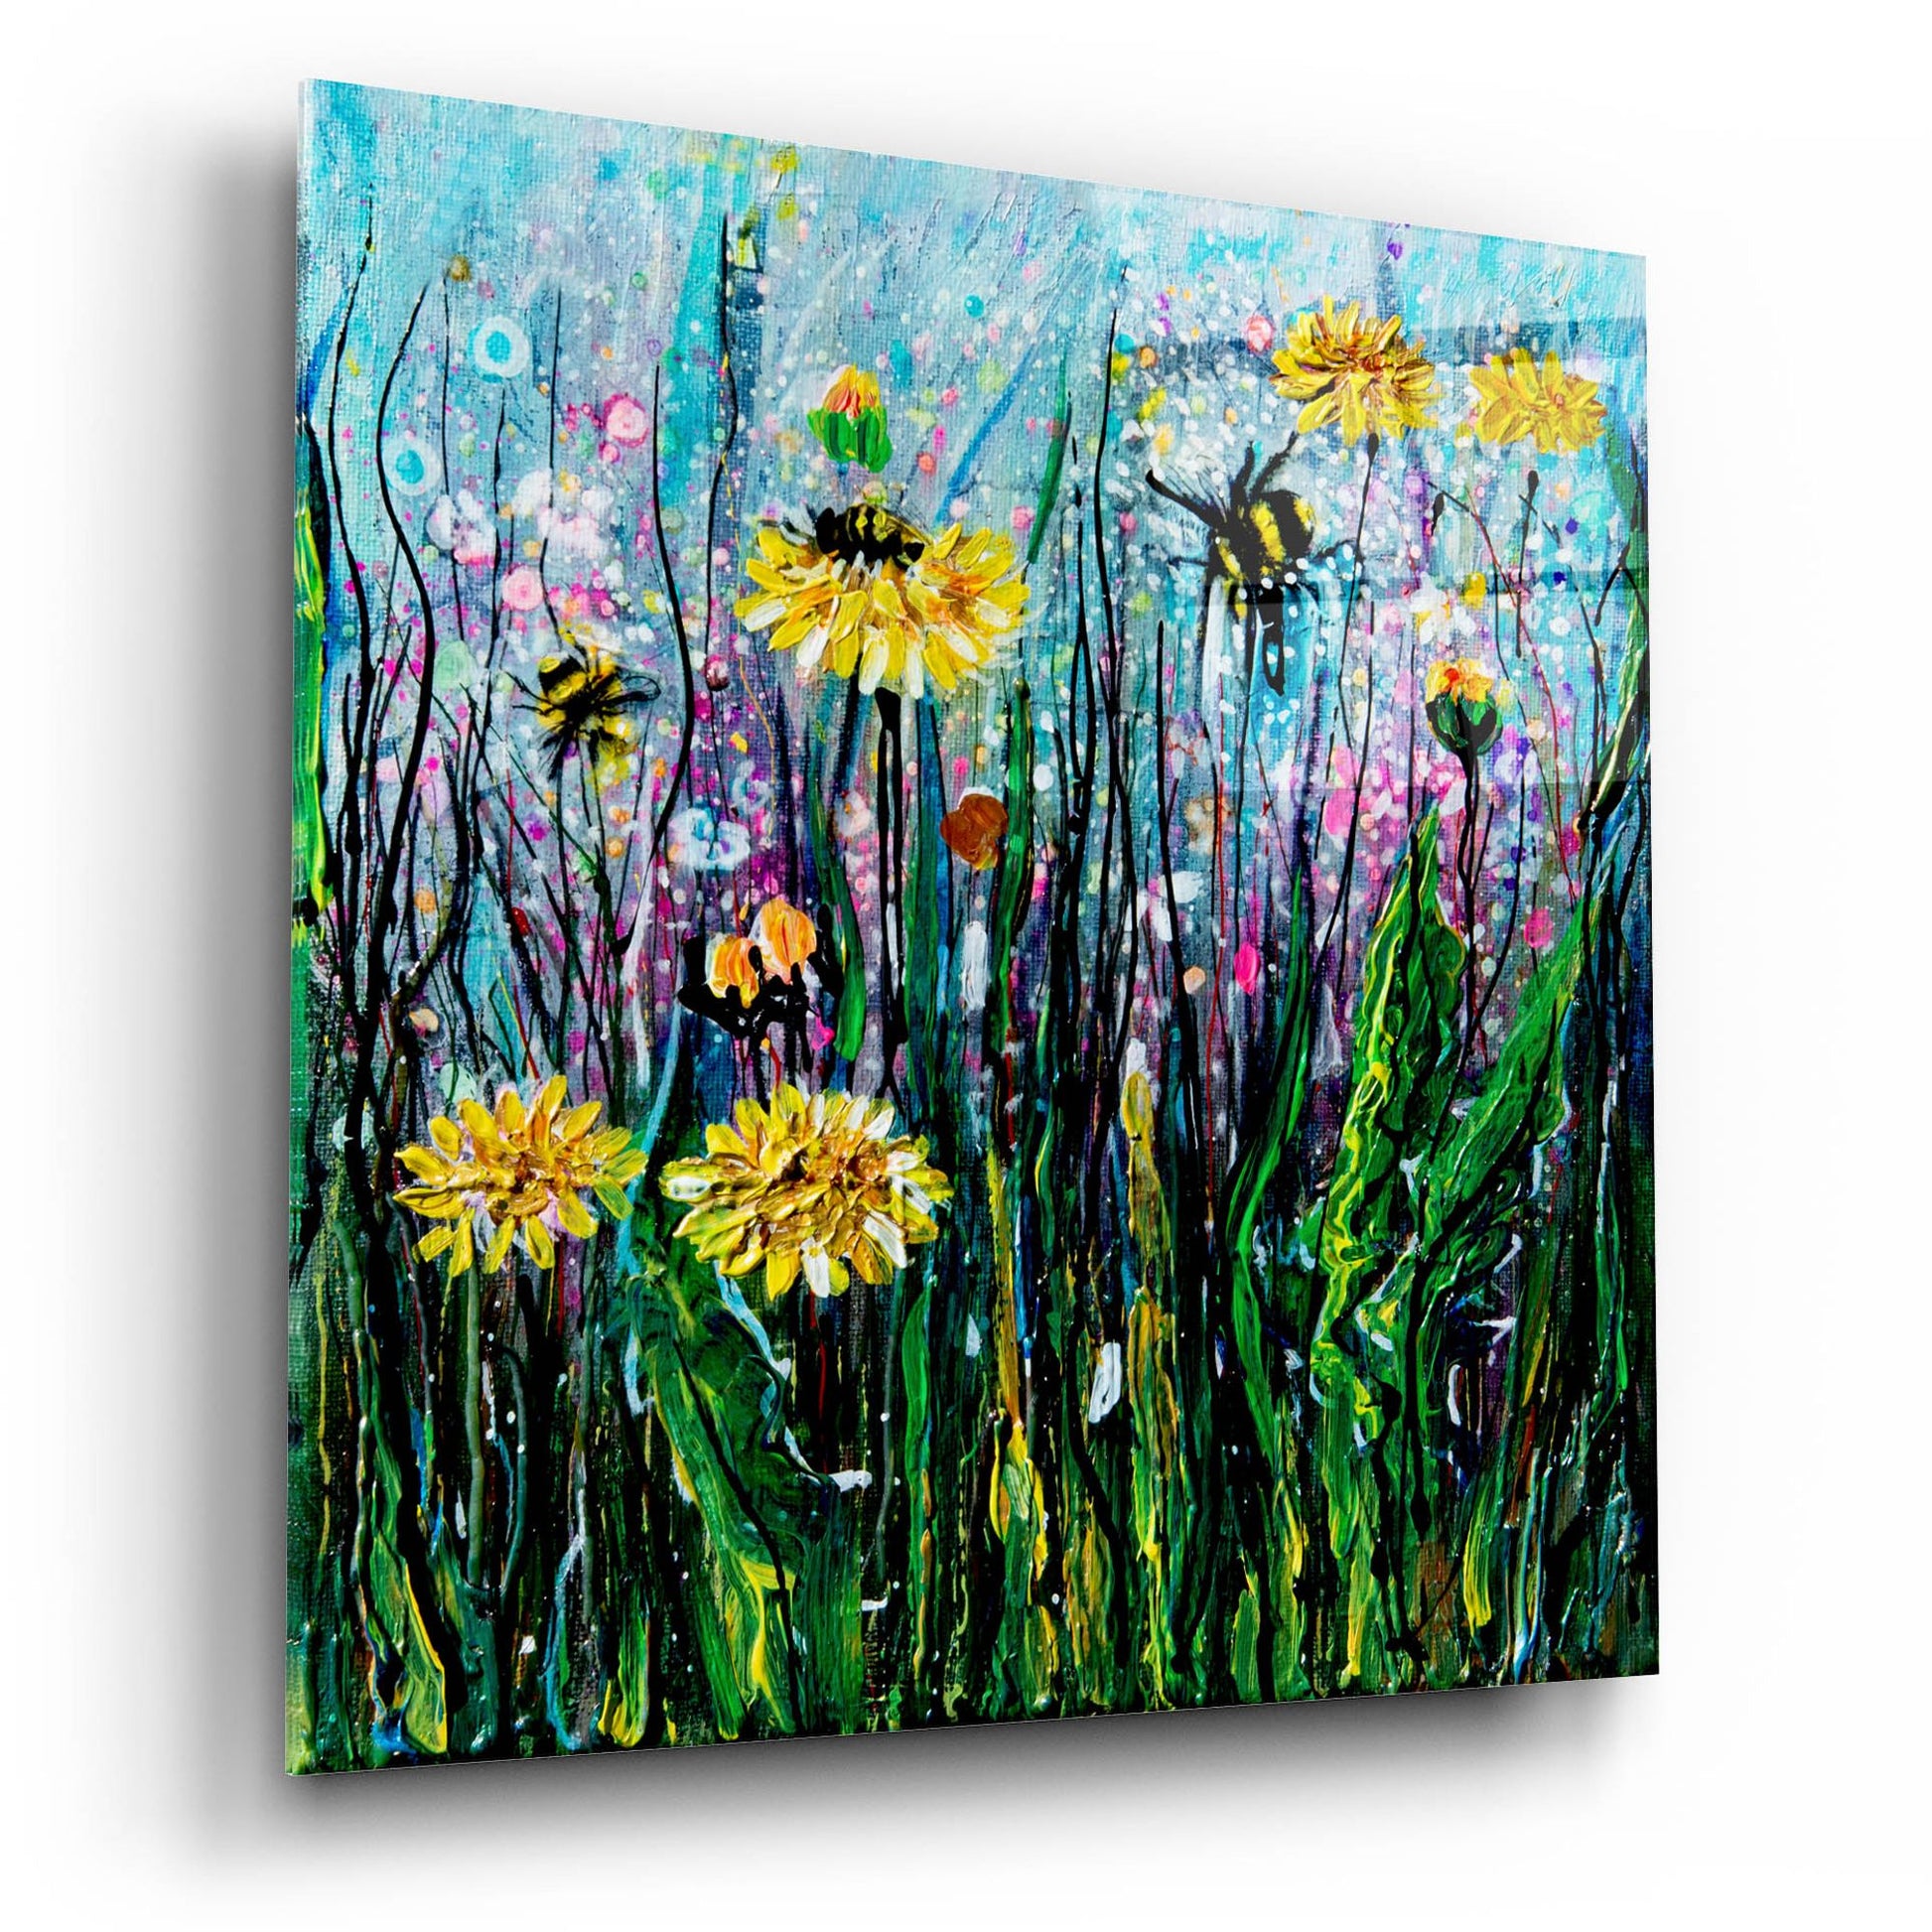 Epic Art 'Field of Flowers and a Bee' by Lena Owens, Acrylic Glass Wall Art,12x12